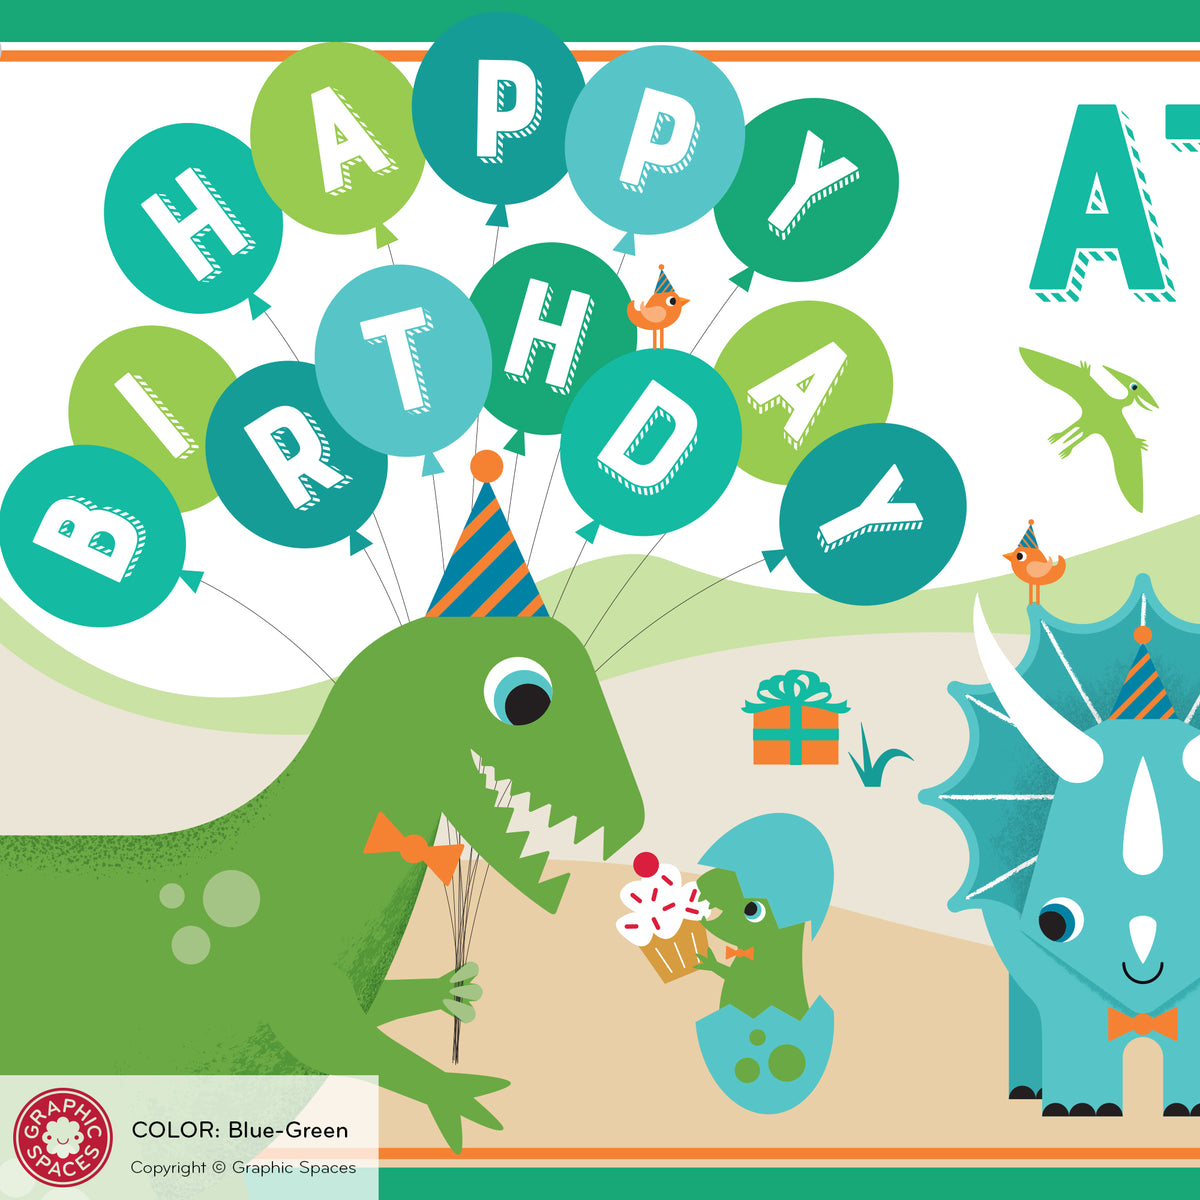 Dinosaur Birthday Party Banner, Personalized - TEAL